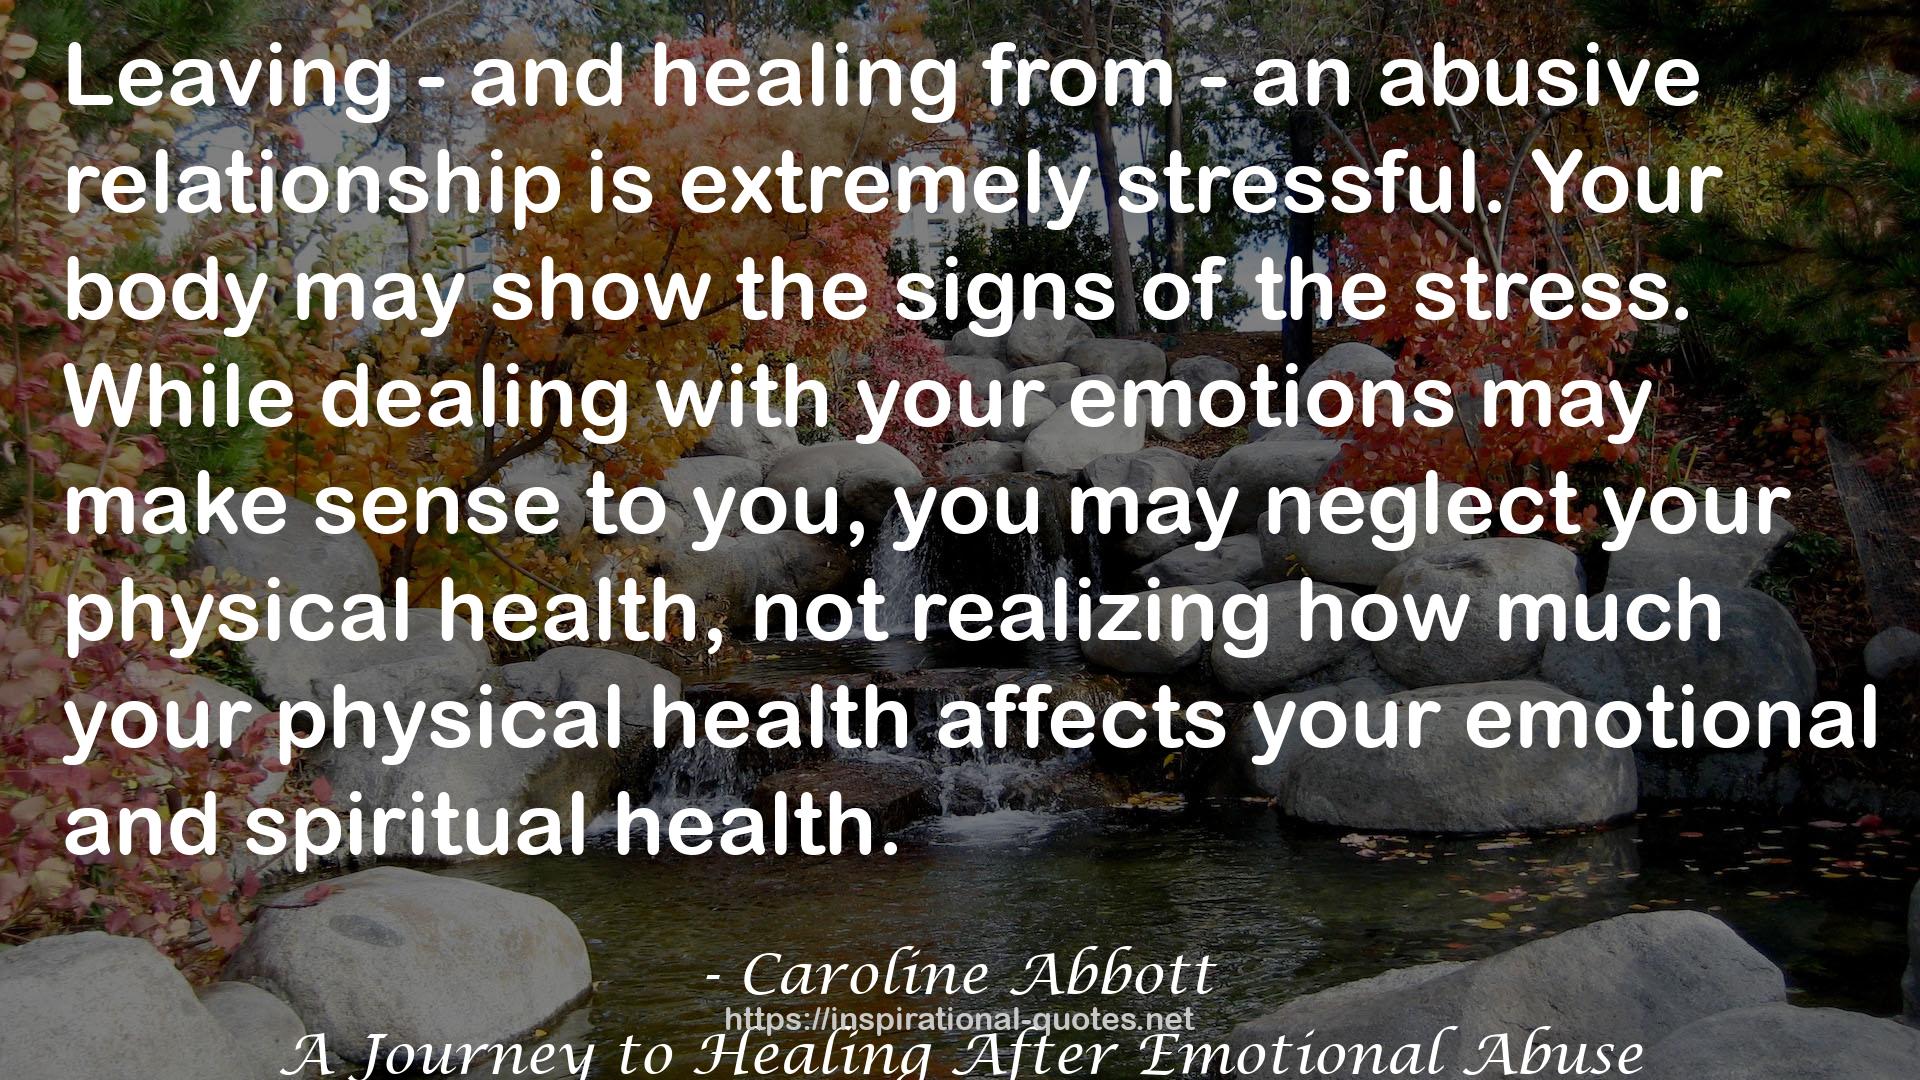 A Journey to Healing After Emotional Abuse QUOTES